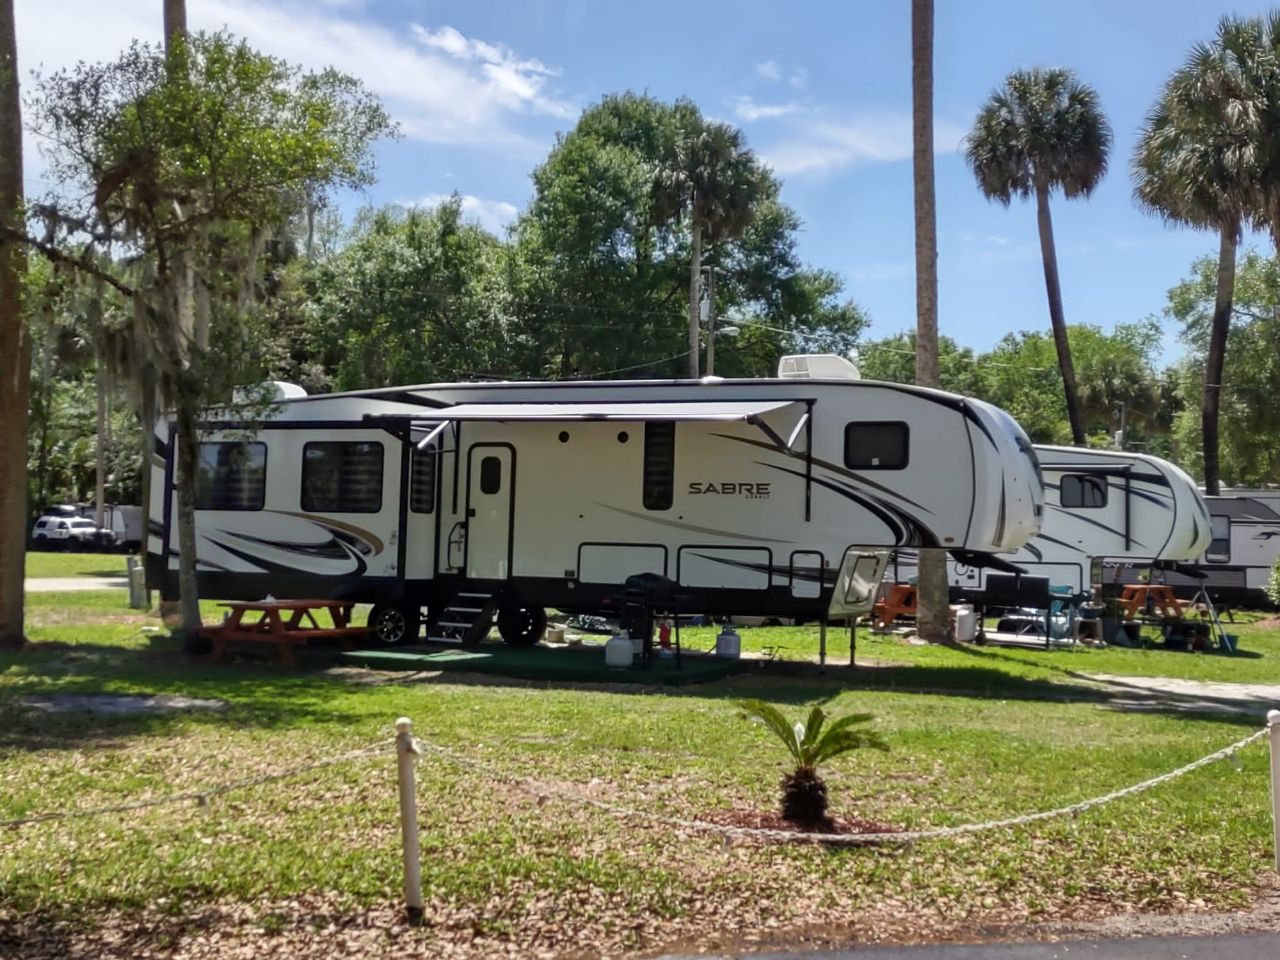 Always Green and Clean At Citra Royal Palm RV Park